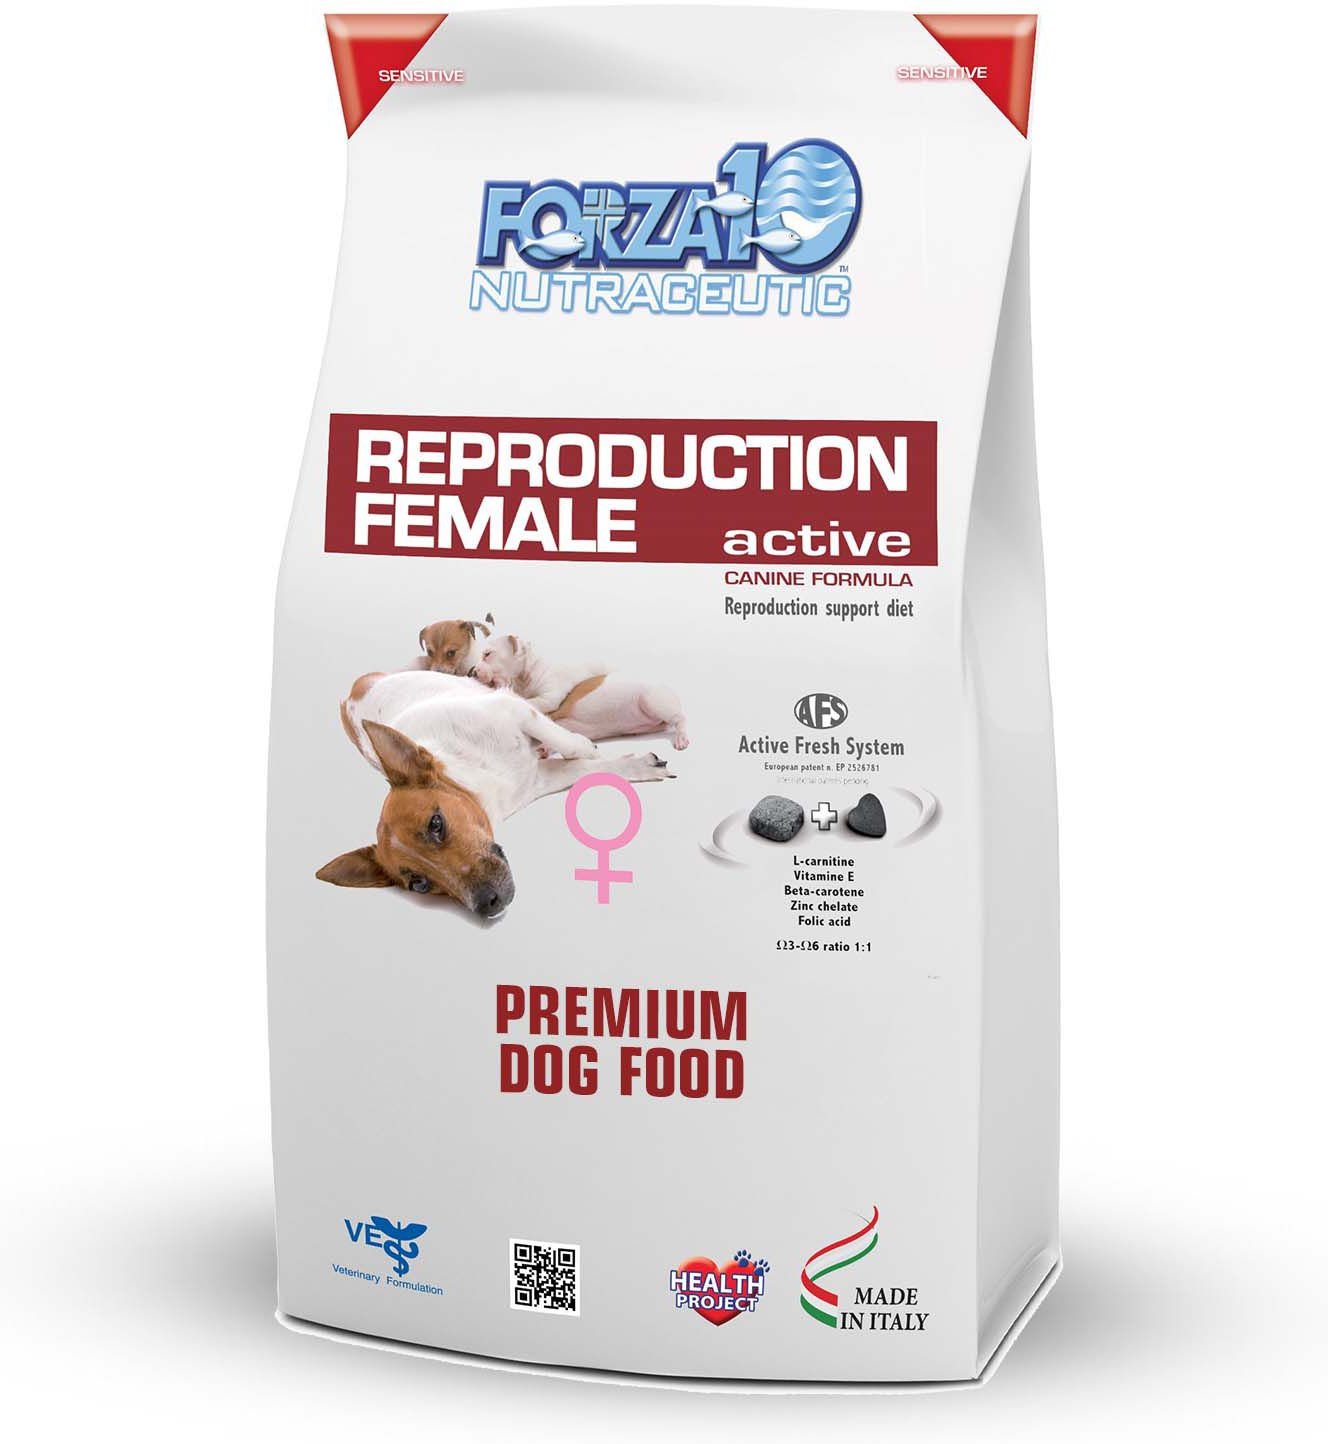 folate supplement for dogs